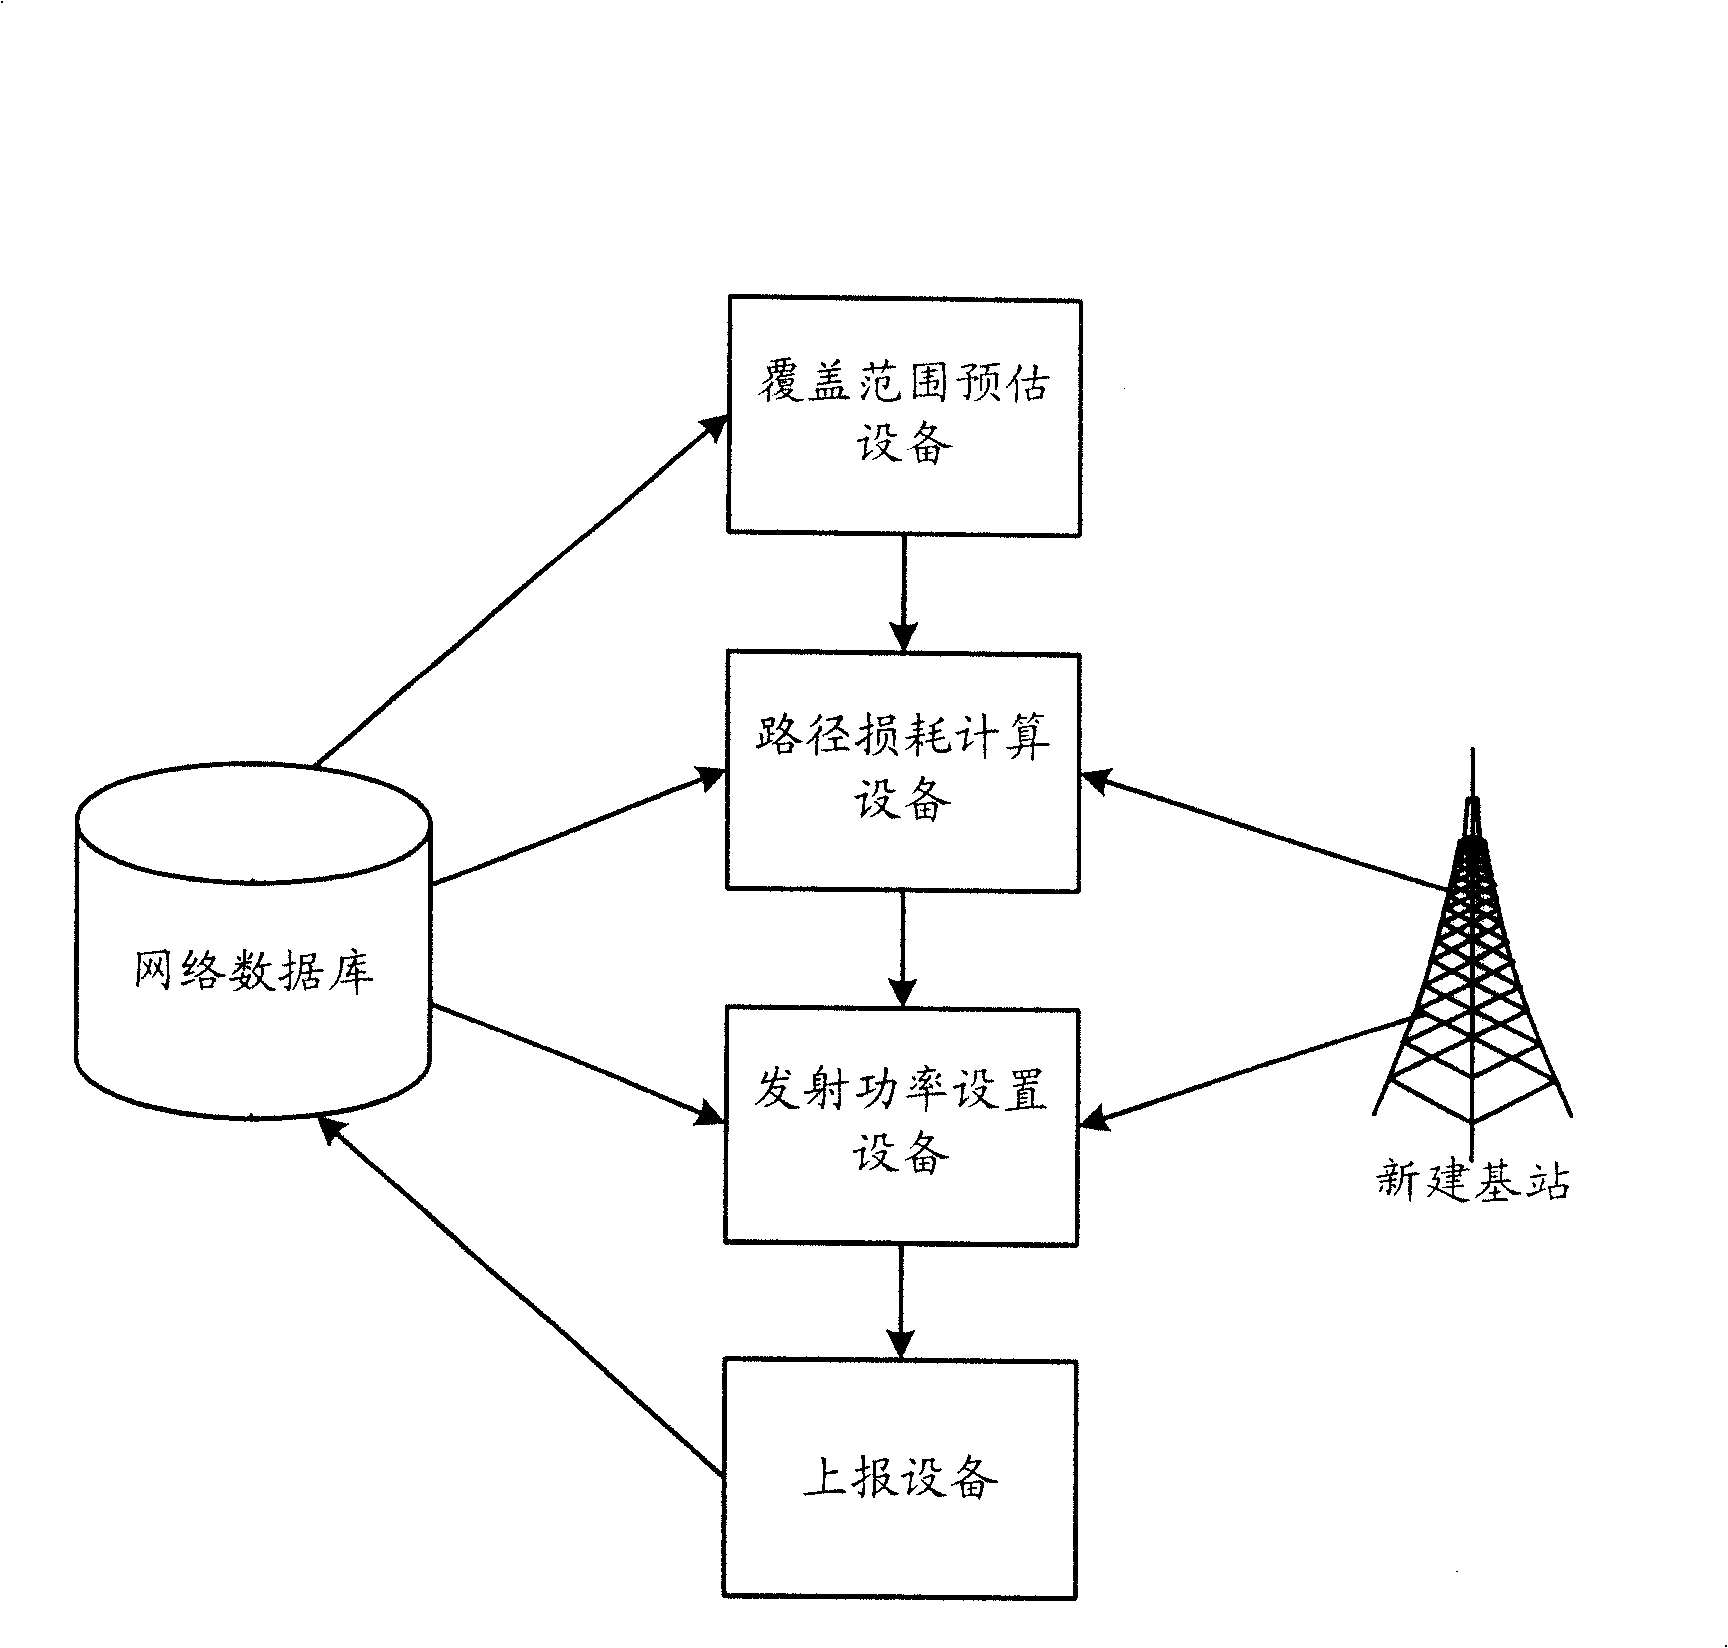 Method and system for base station transmission power setting in wireless honeycomb network